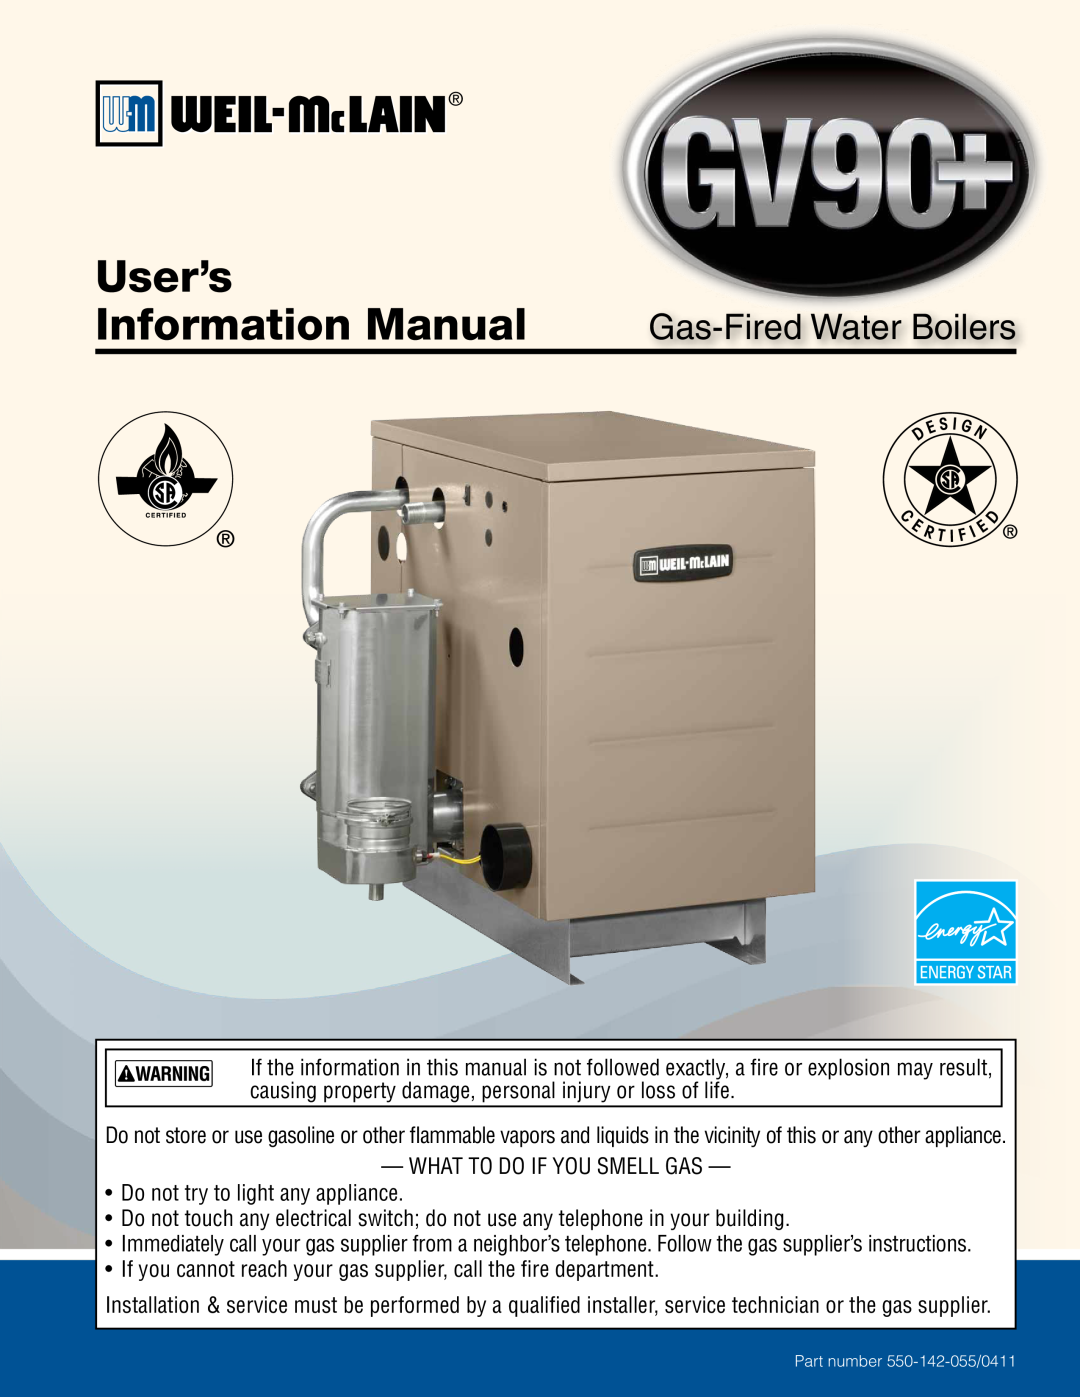 Weil-McLain GV90+ manual User’s Information Manual, Gas-FiredWater Boilers 